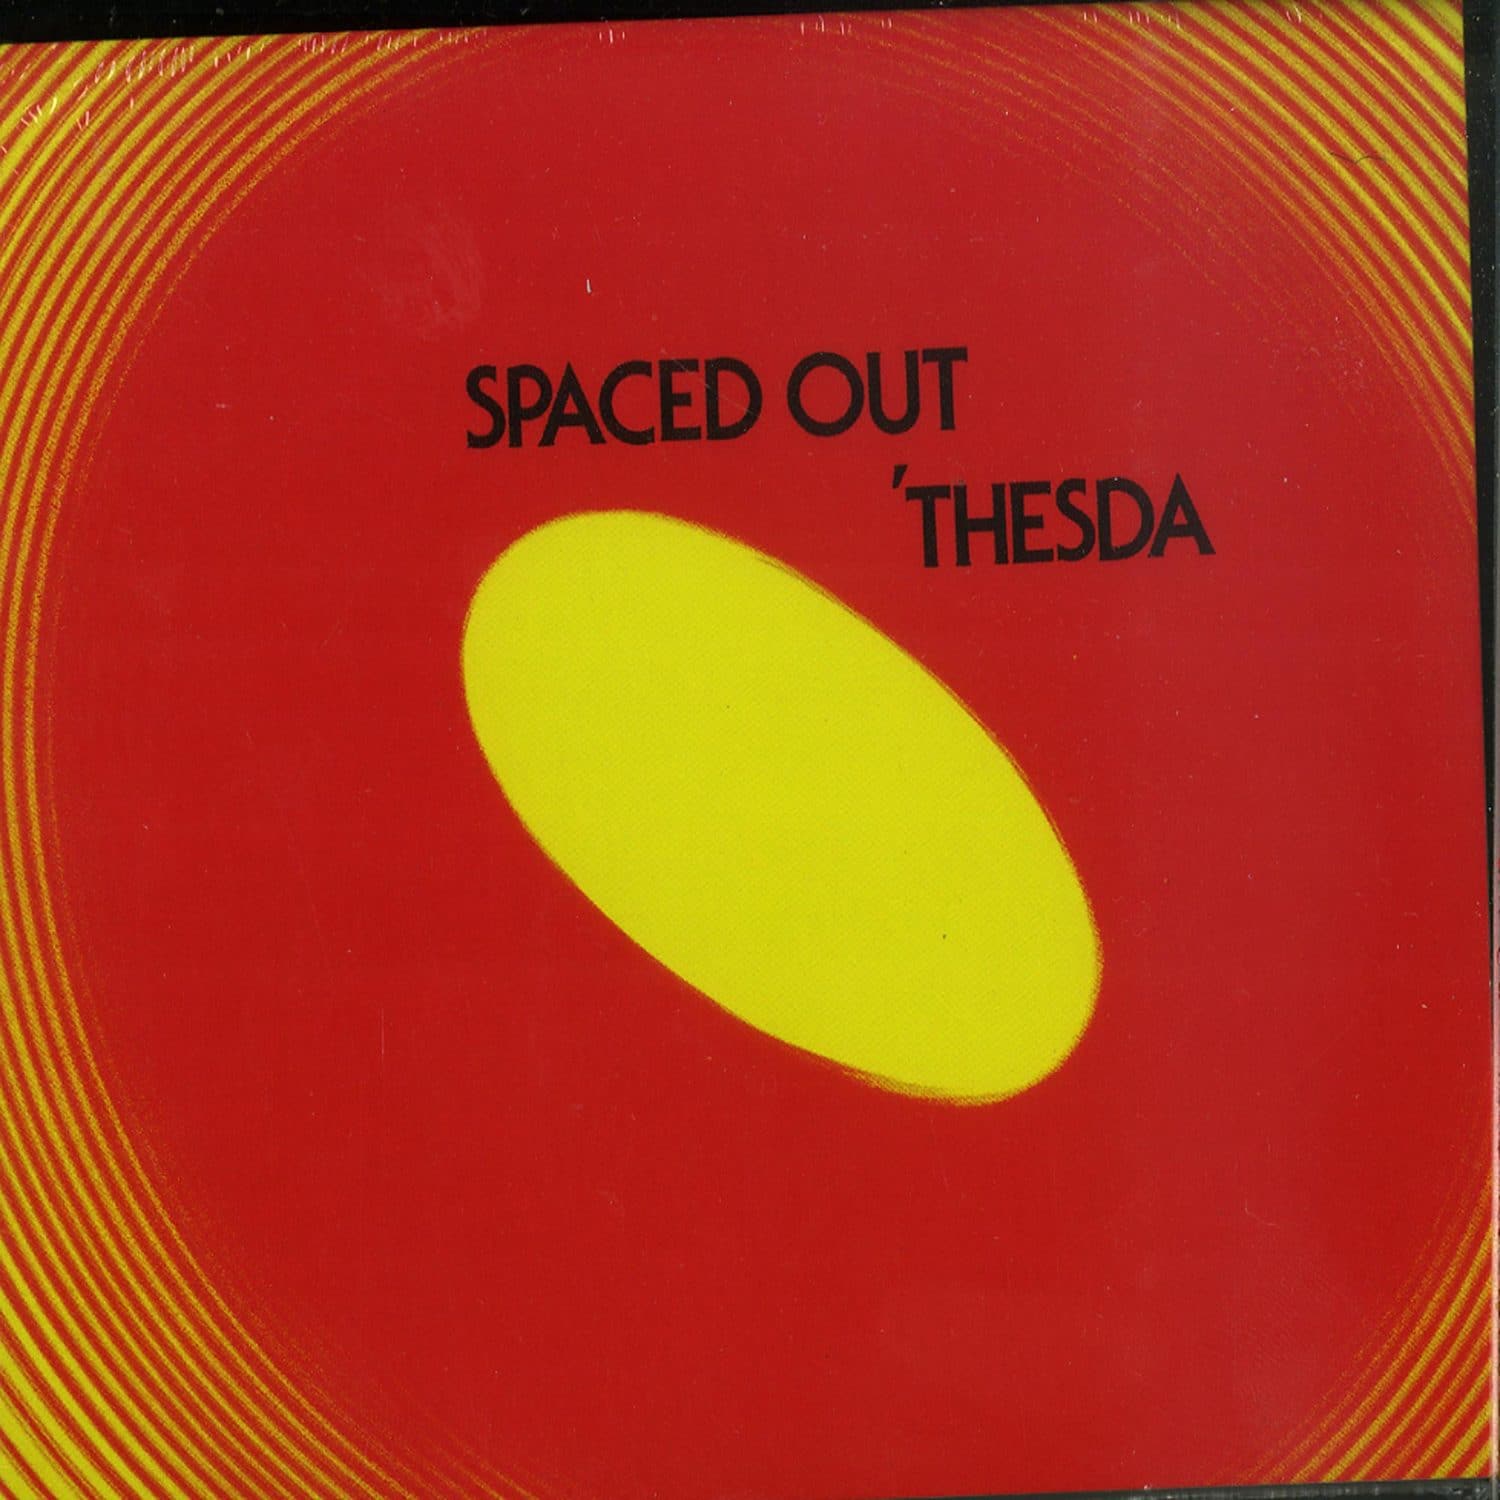 Thesda - SPACED OUT 